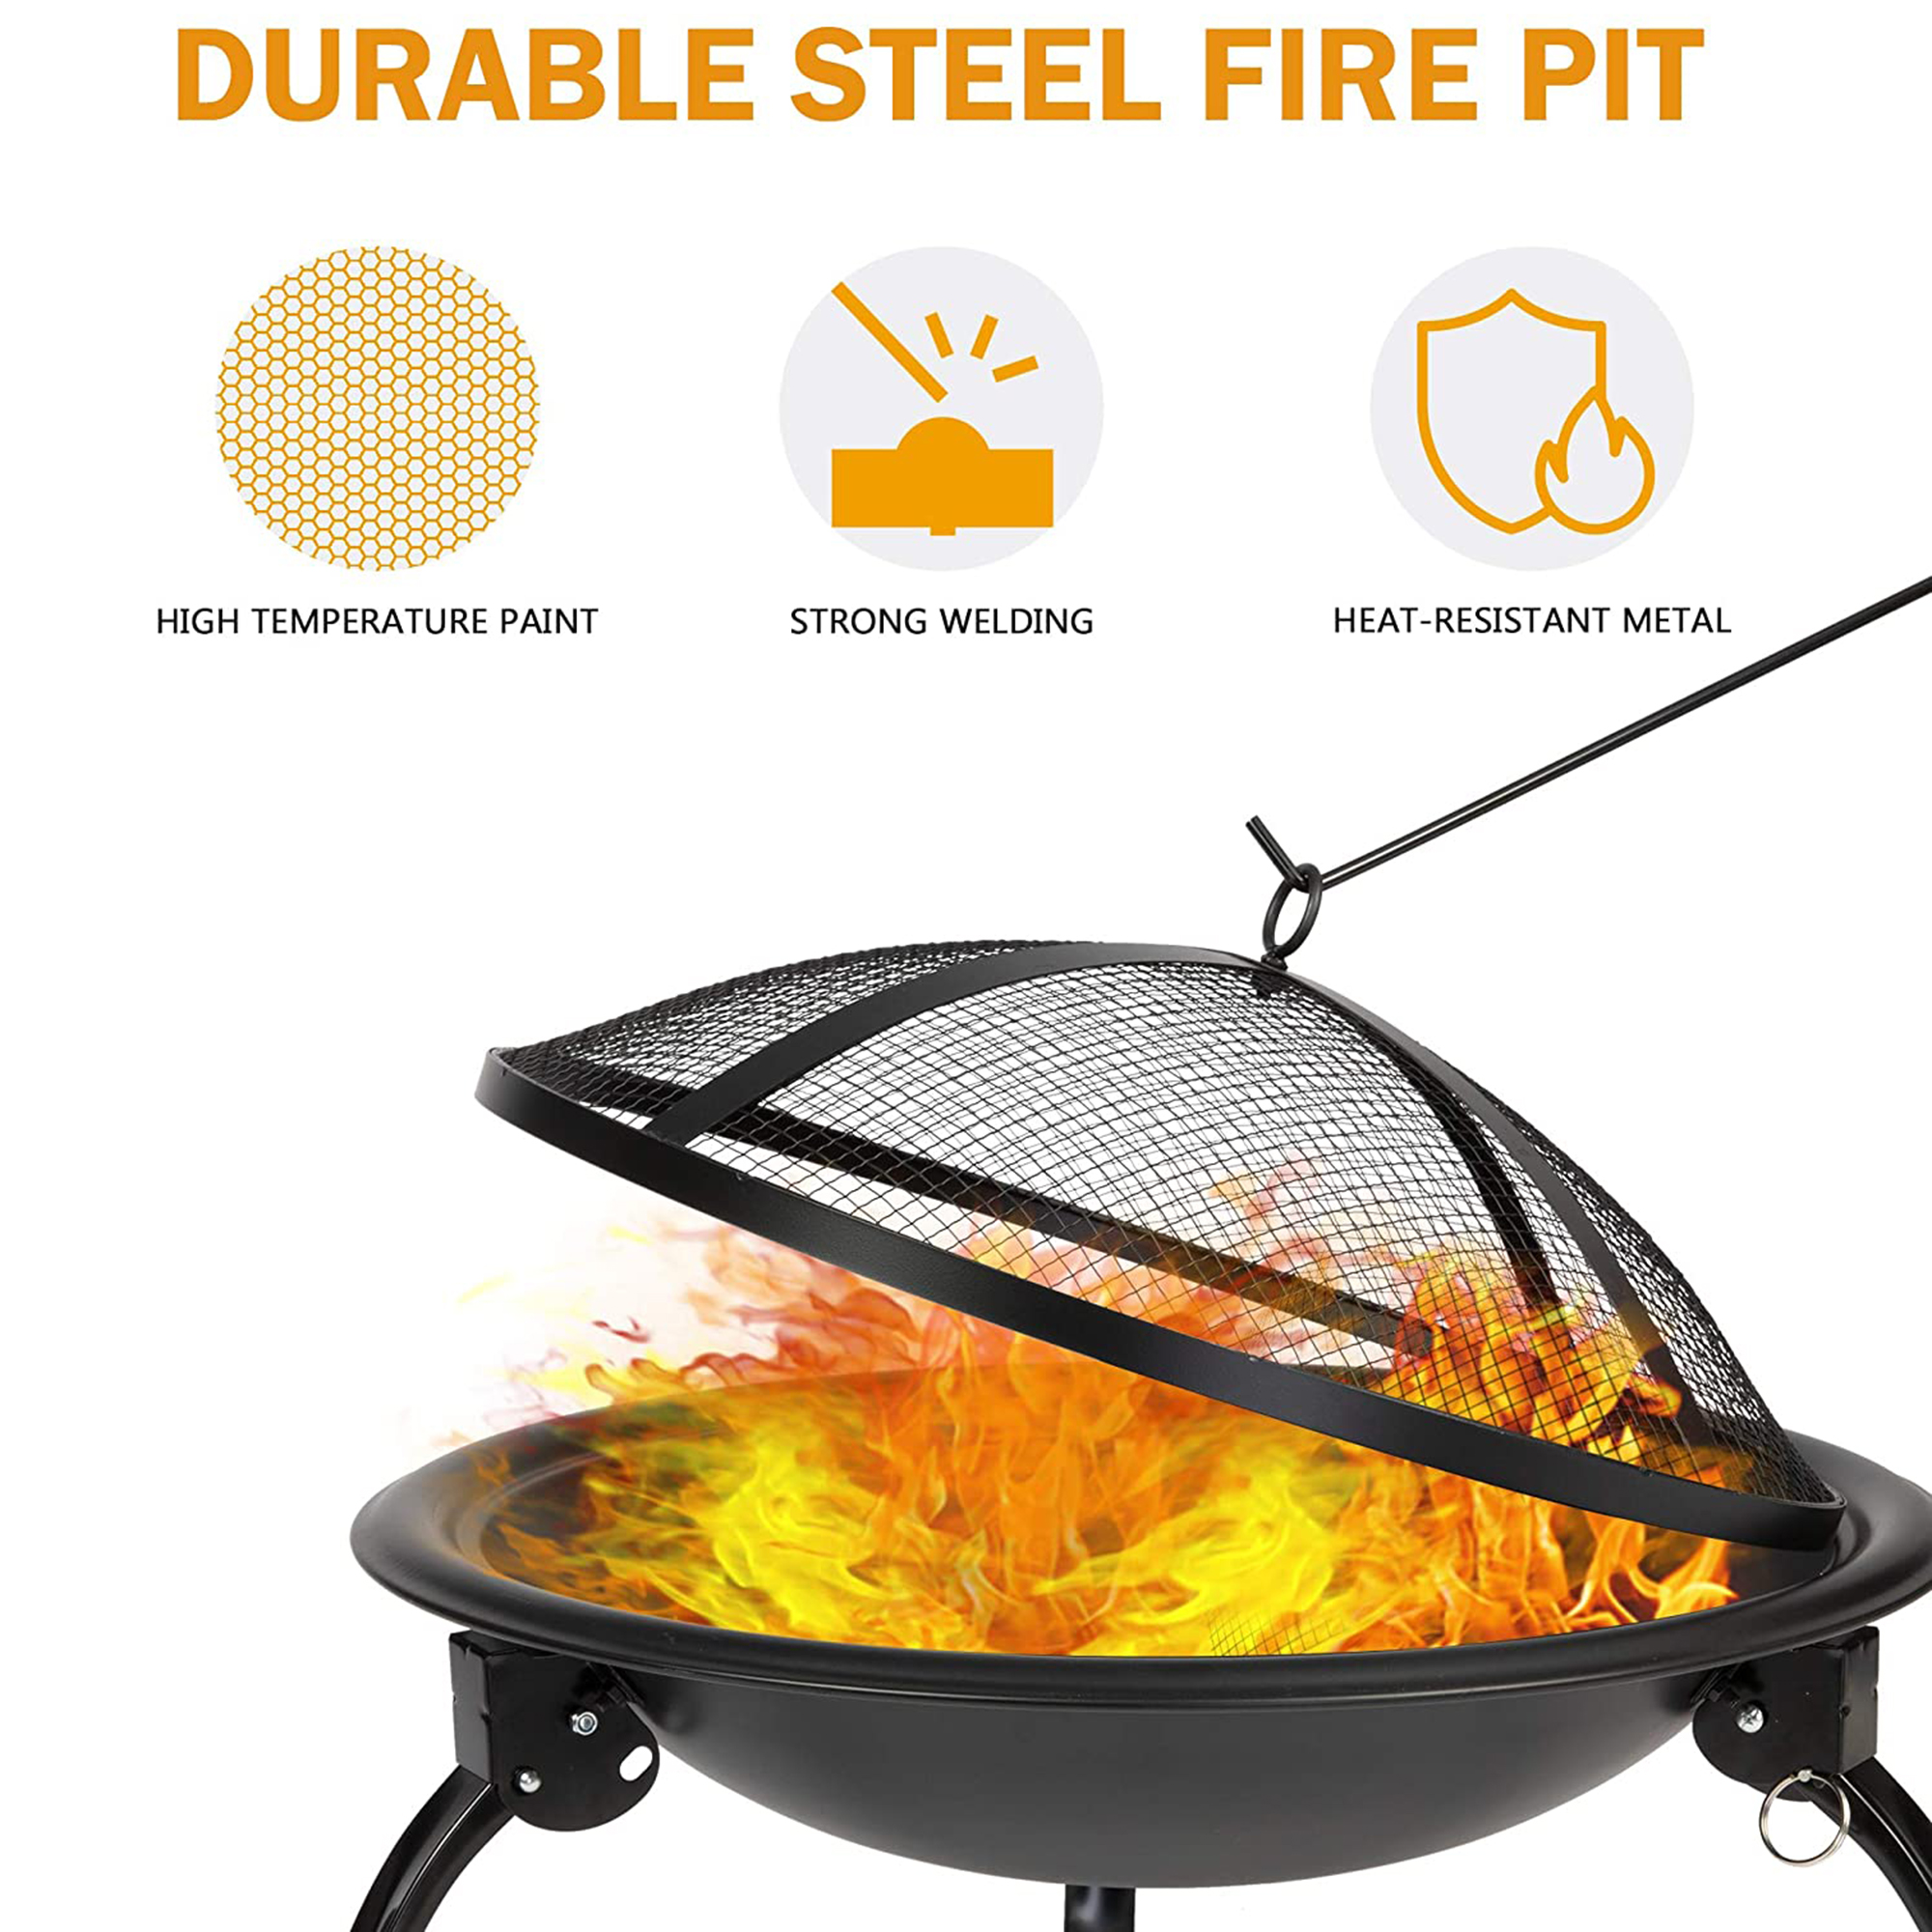 KARMAS PRODUCT 21'' Portable Fire Pit Outdoor Wood Burning BBQ Grill Firepit Bowl with Mesh Spark Screen Cover Fire Poker for Backyard Garden Camping Picnic Beach Park - image 2 of 7